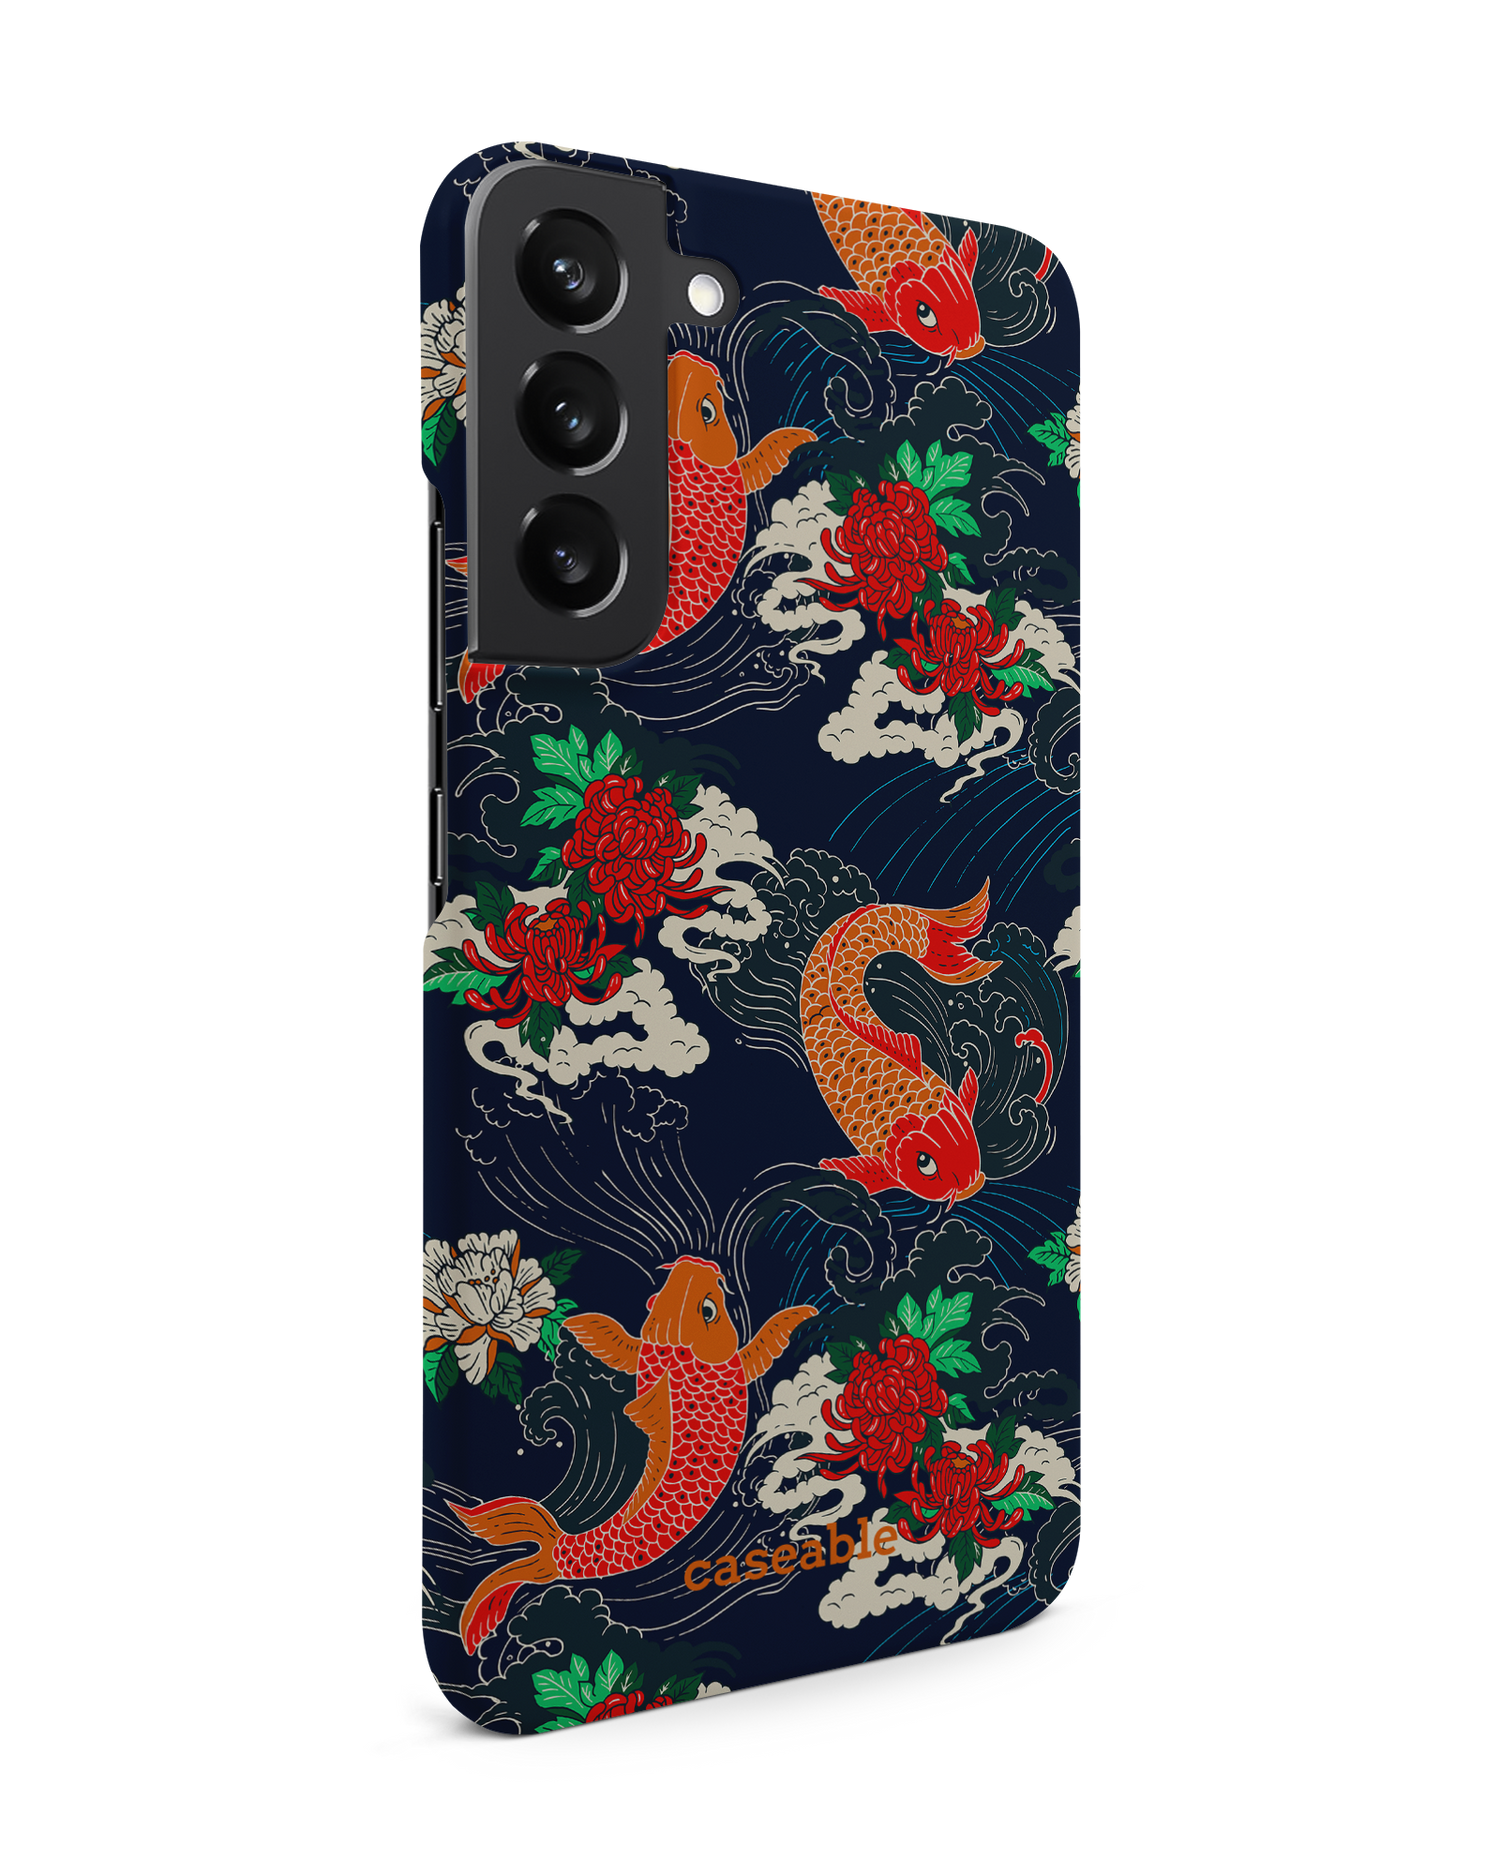 Repeating Koi Hard Shell Phone Case Samsung Galaxy S22 Plus 5G: View from the left side